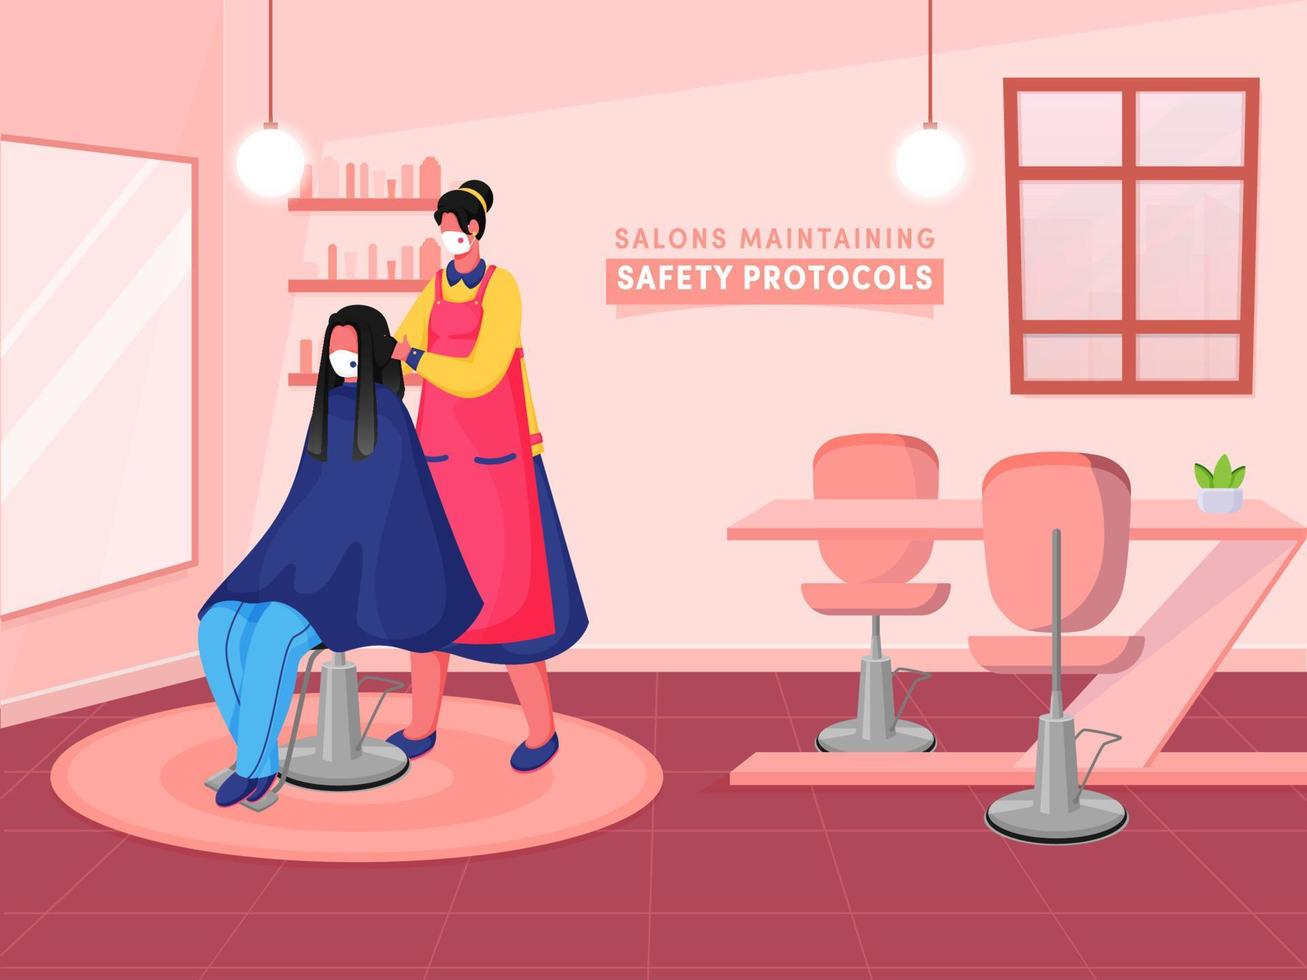 Female Hairdresser Cutting Hair a Client Sitting on Chair in her Salon During Coronavirus Pandemic. Can Be Used As Poster Or Banner Design. vector